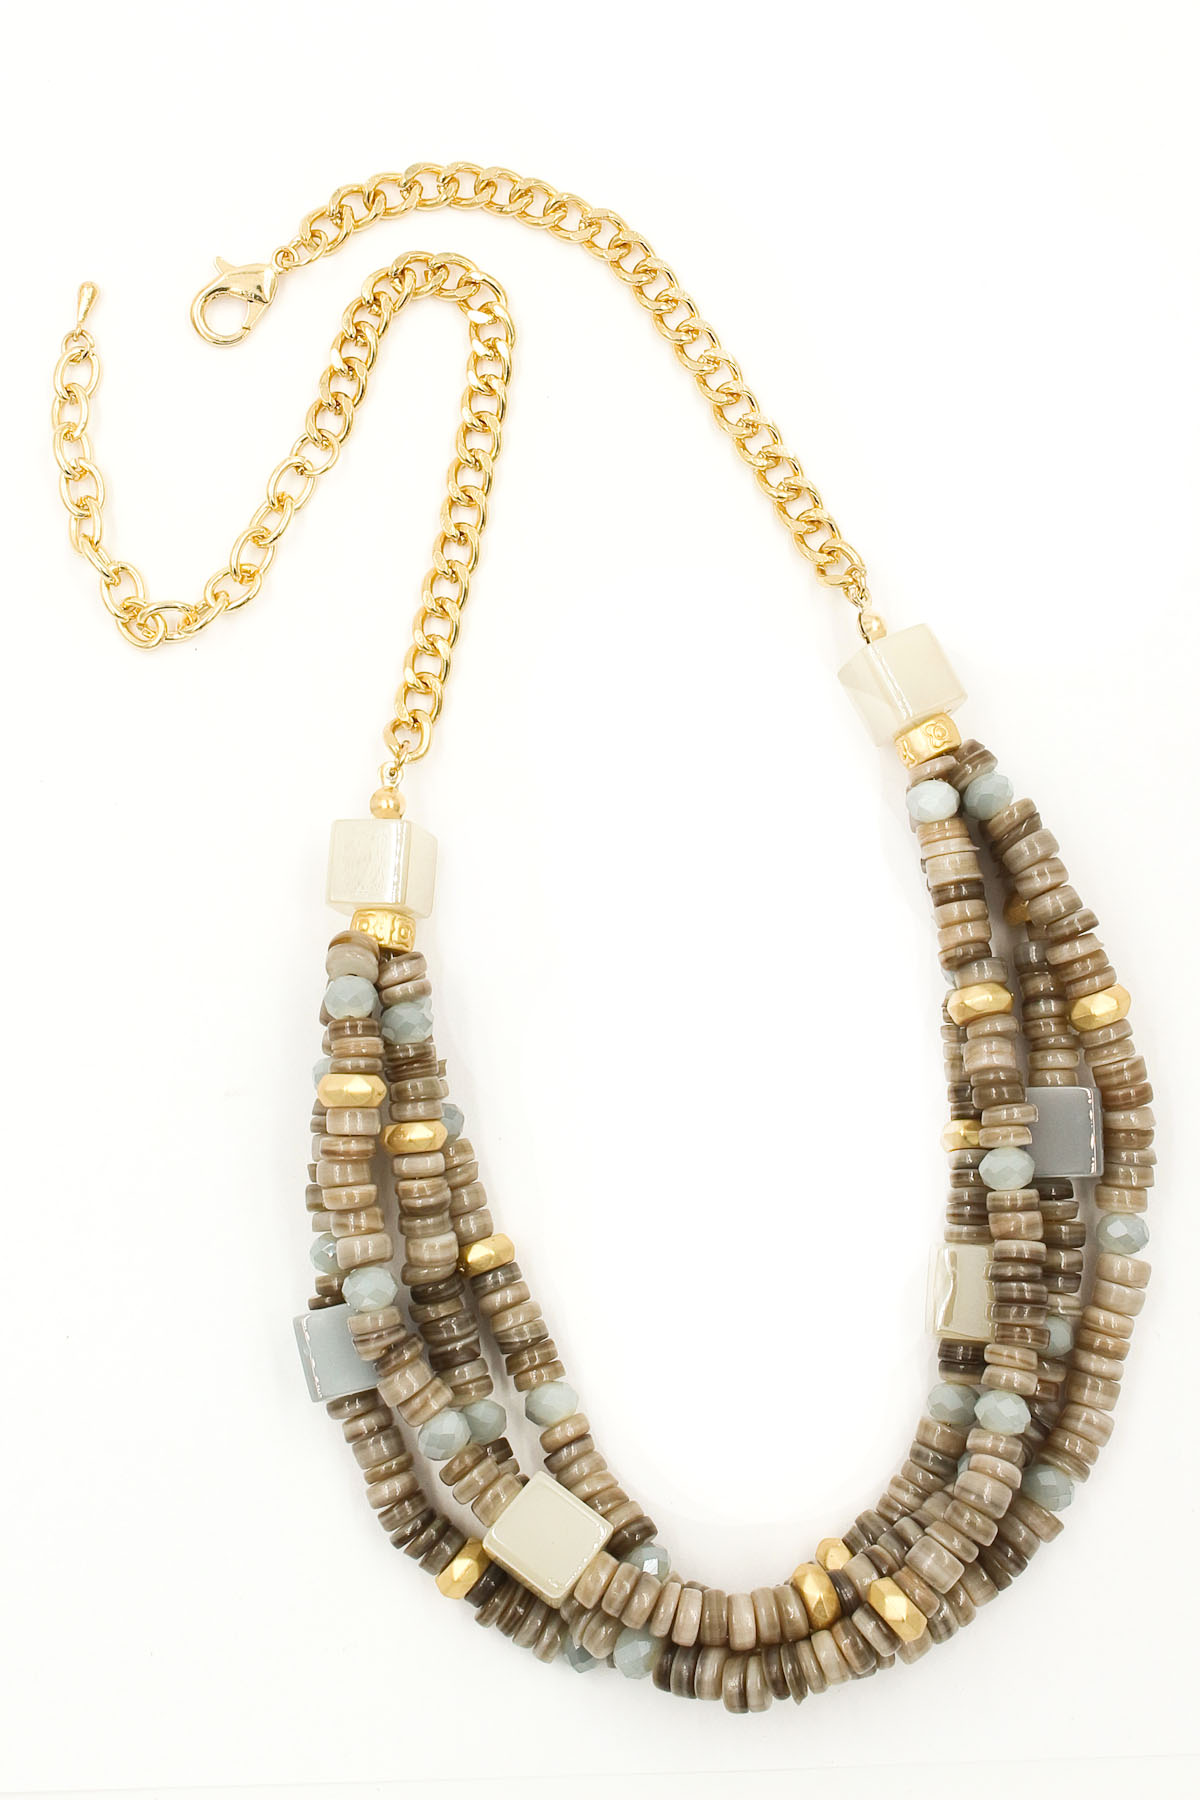 Woven Glass Bead/Shell Necklace - Necklaces